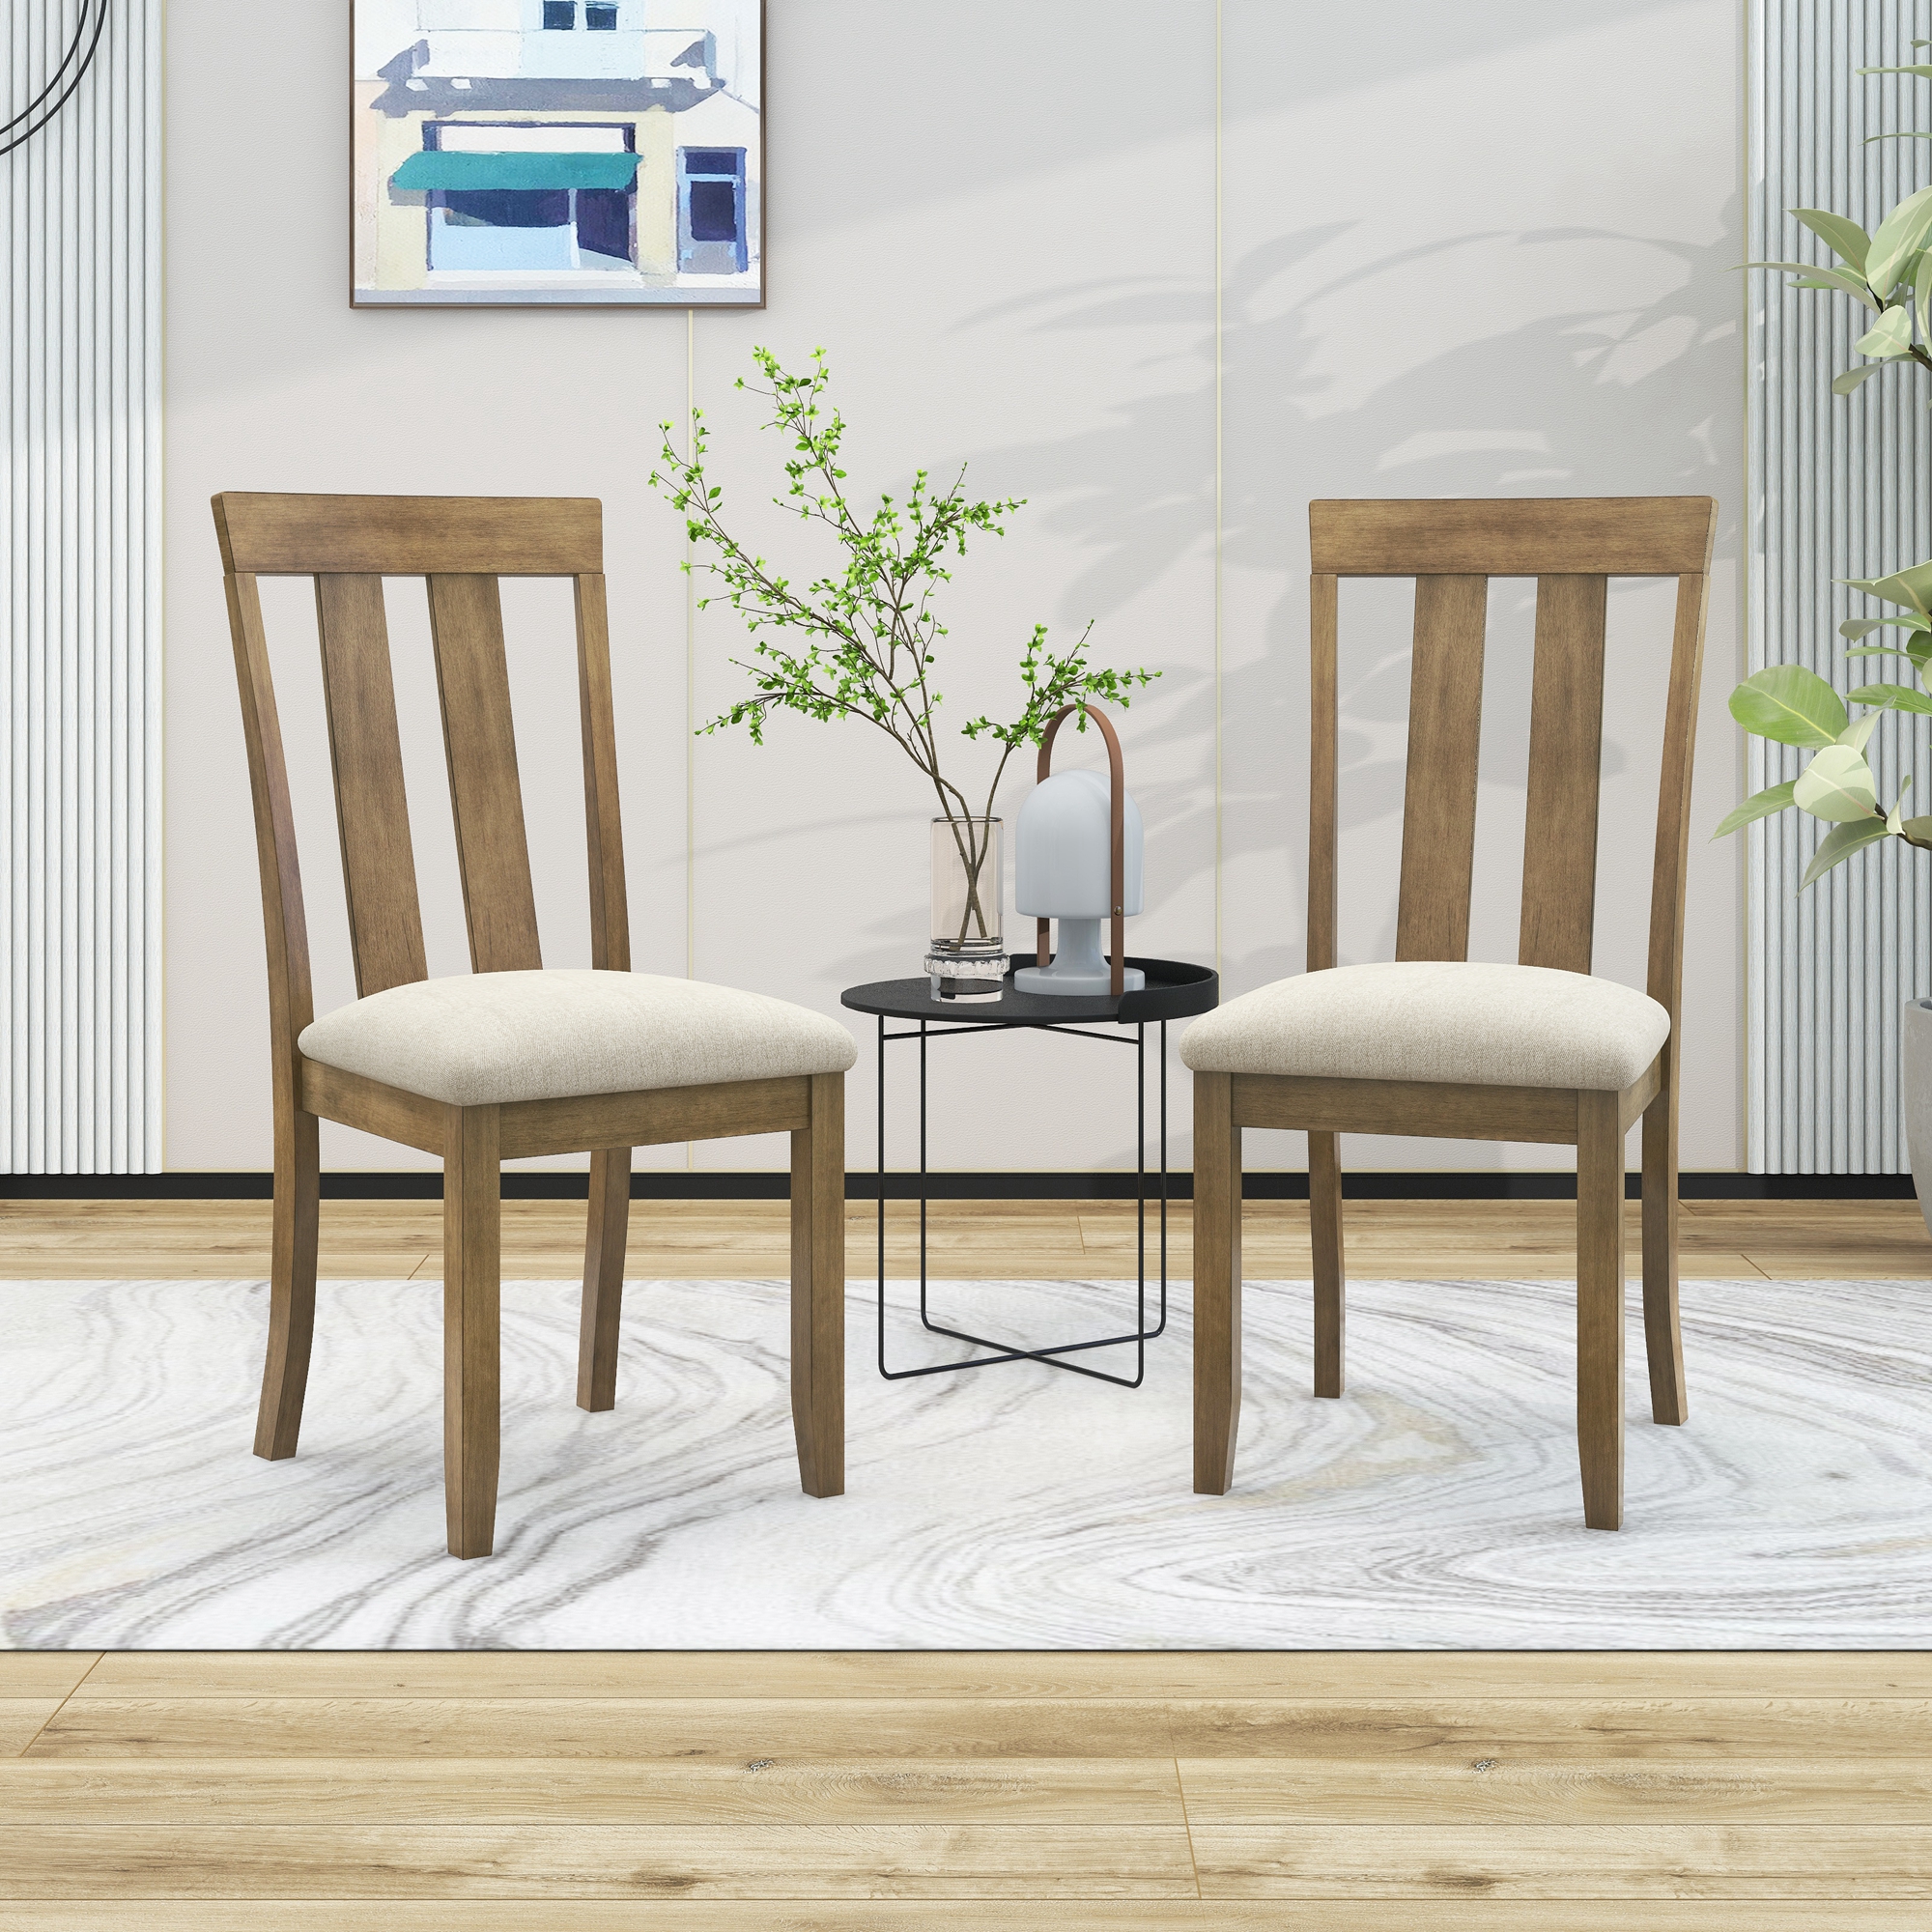 Fabric Dining Chairs with Seat Cushions and Curved Back - WF291210AAD